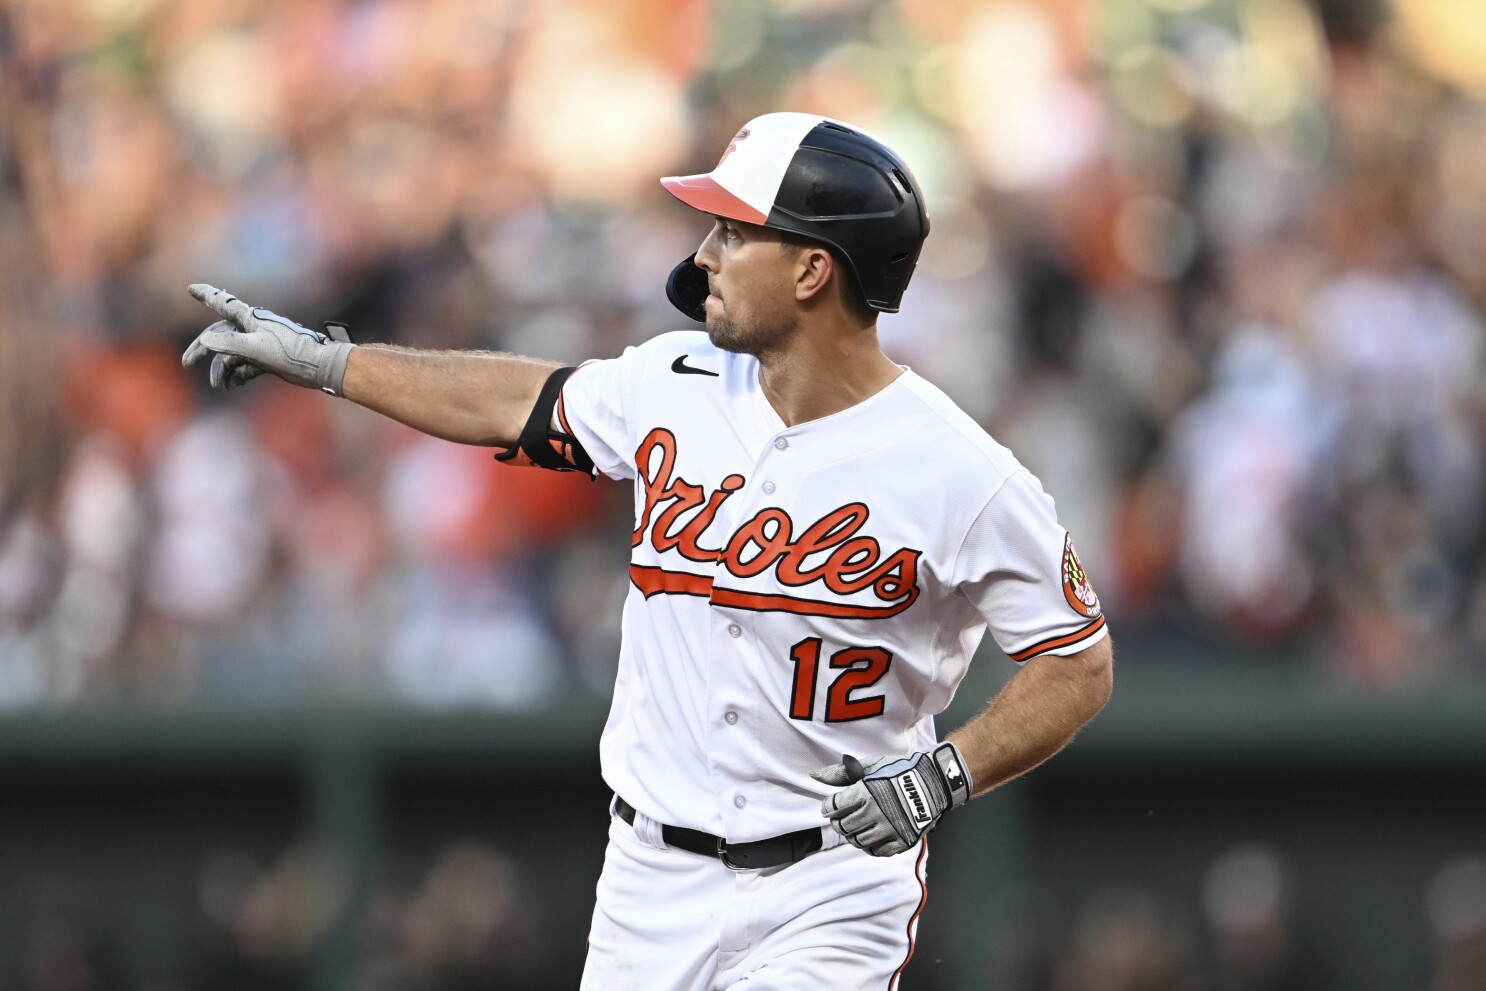 Orioles score 7 runs in 1st inning, pound the Yankees 9-3 to stay 1 1/2  games up in AL East